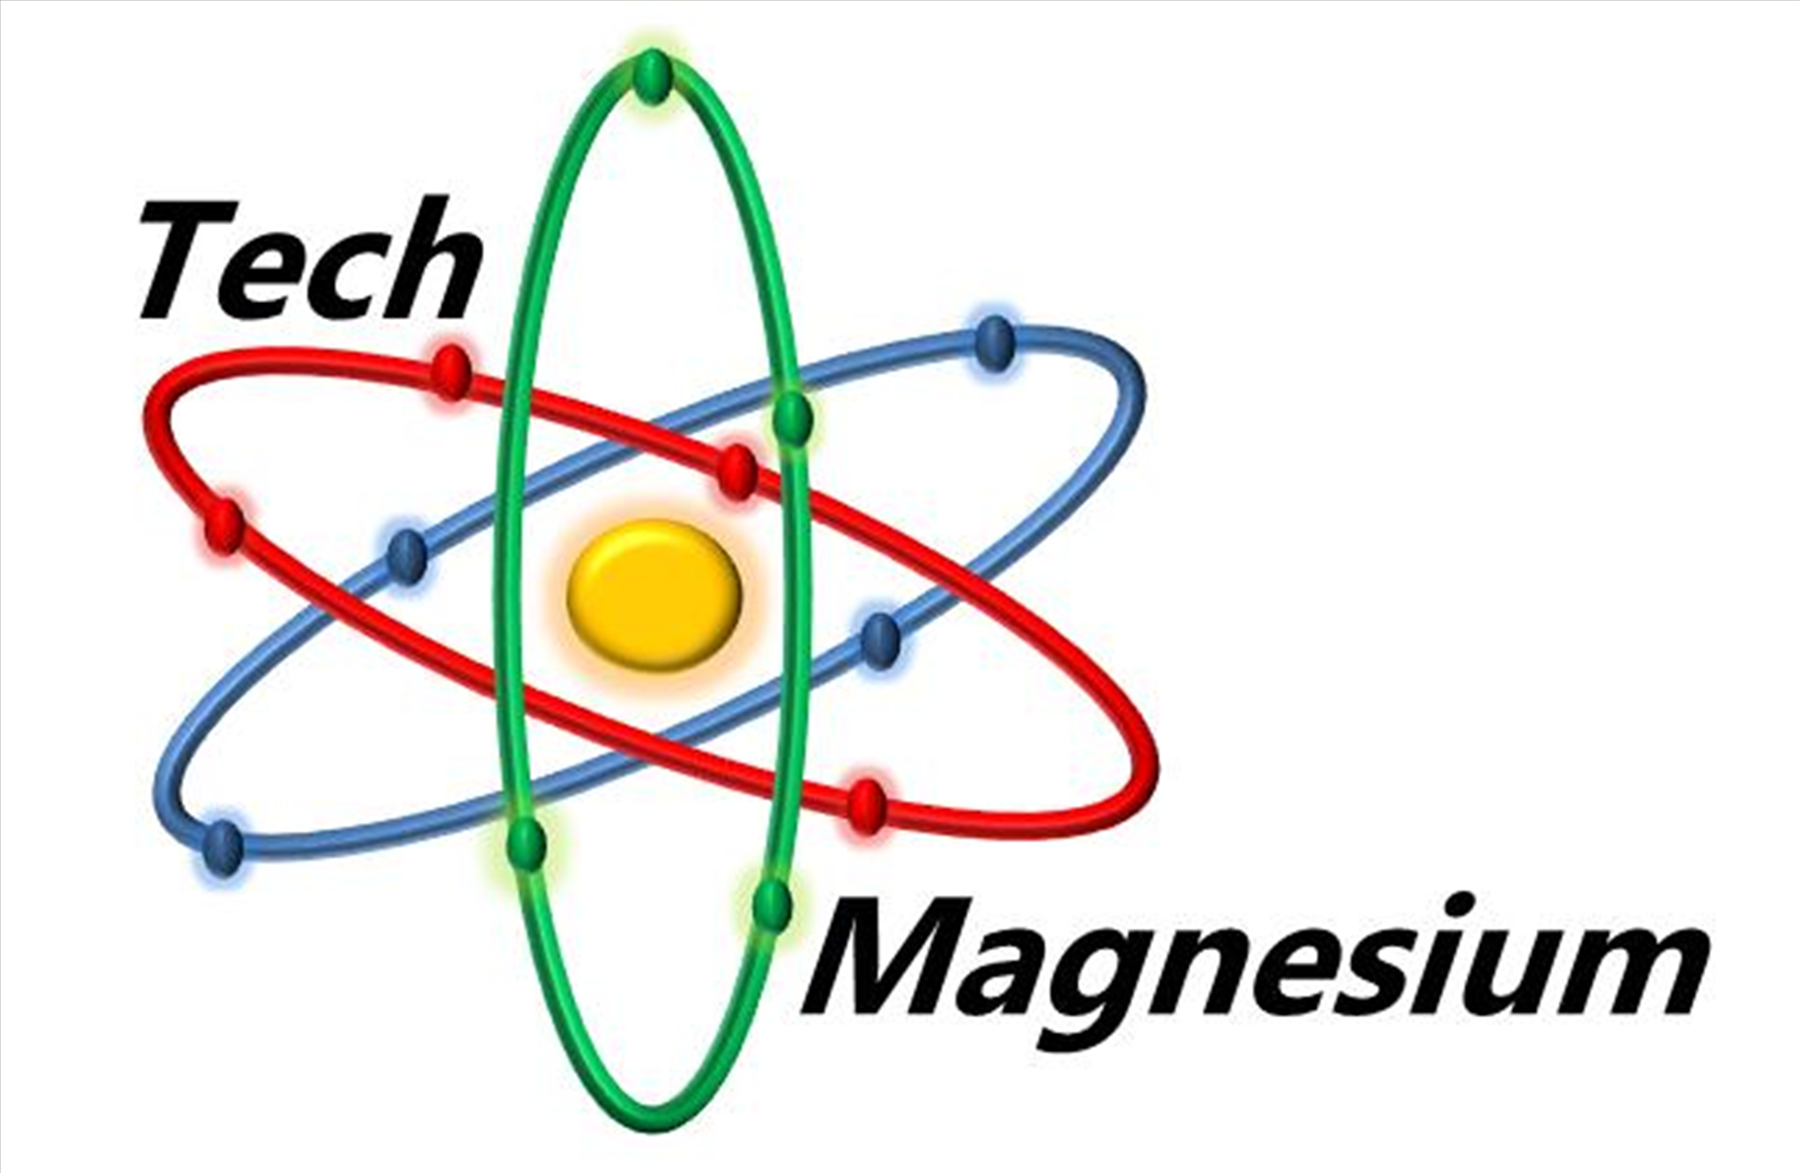 MAG ONE CONCLUDES TECHNOLOGY ACQUISITION AGREEMENT WITH TECH MAGNESIUM